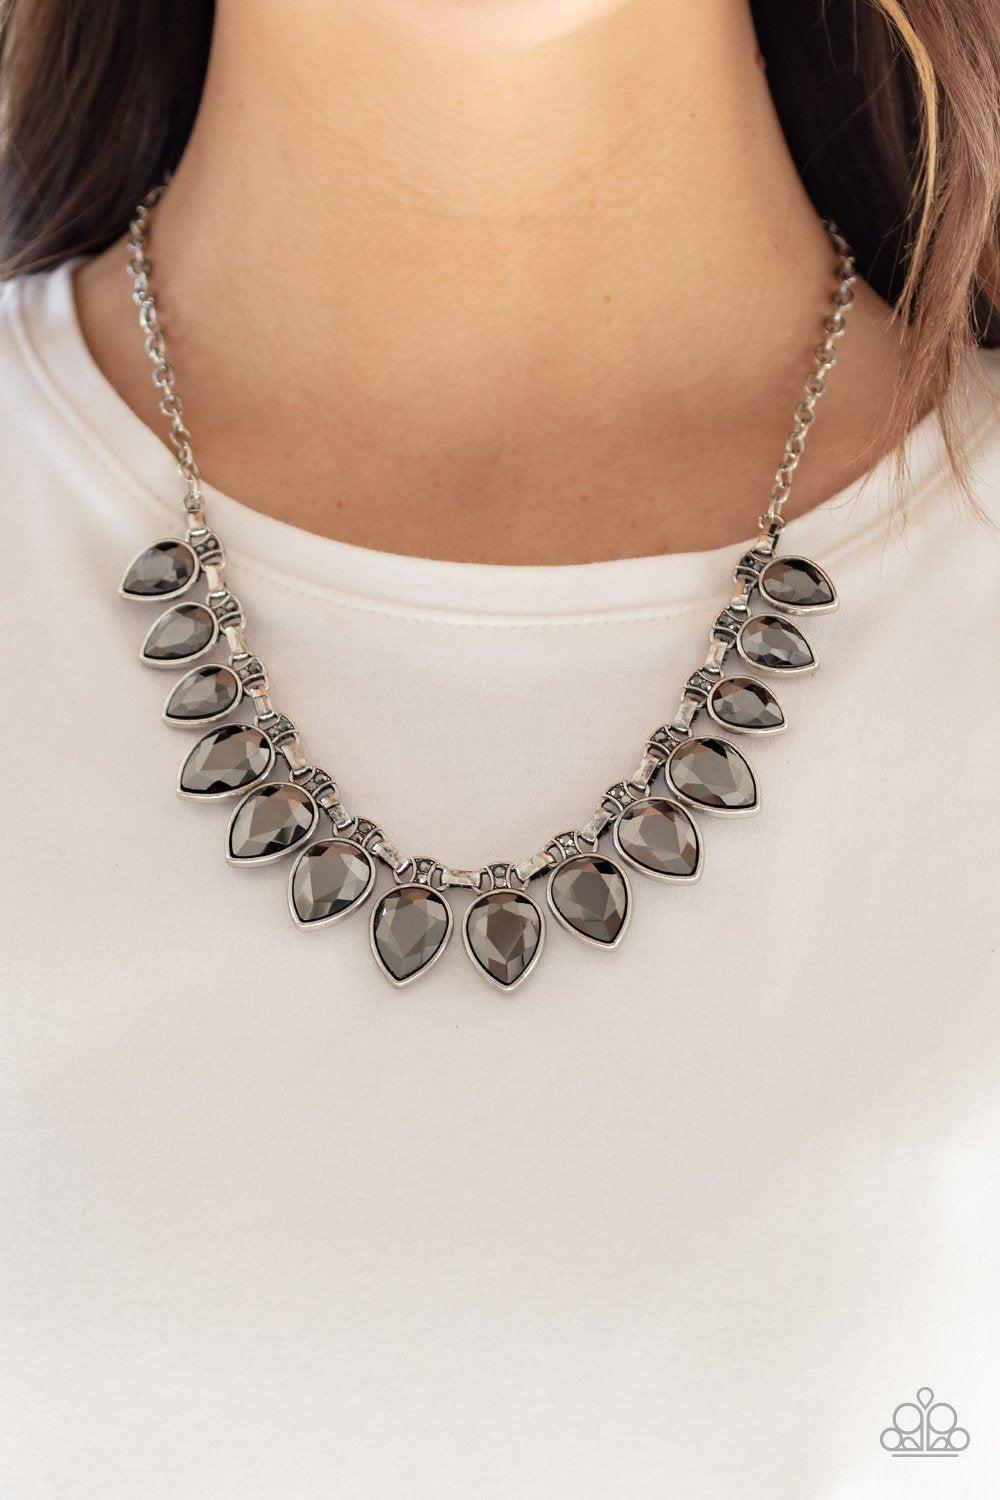 FEARLESS is More Silver Hematite Teardrop Necklace - Paparazzi Accessories-CarasShop.com - $5 Jewelry by Cara Jewels